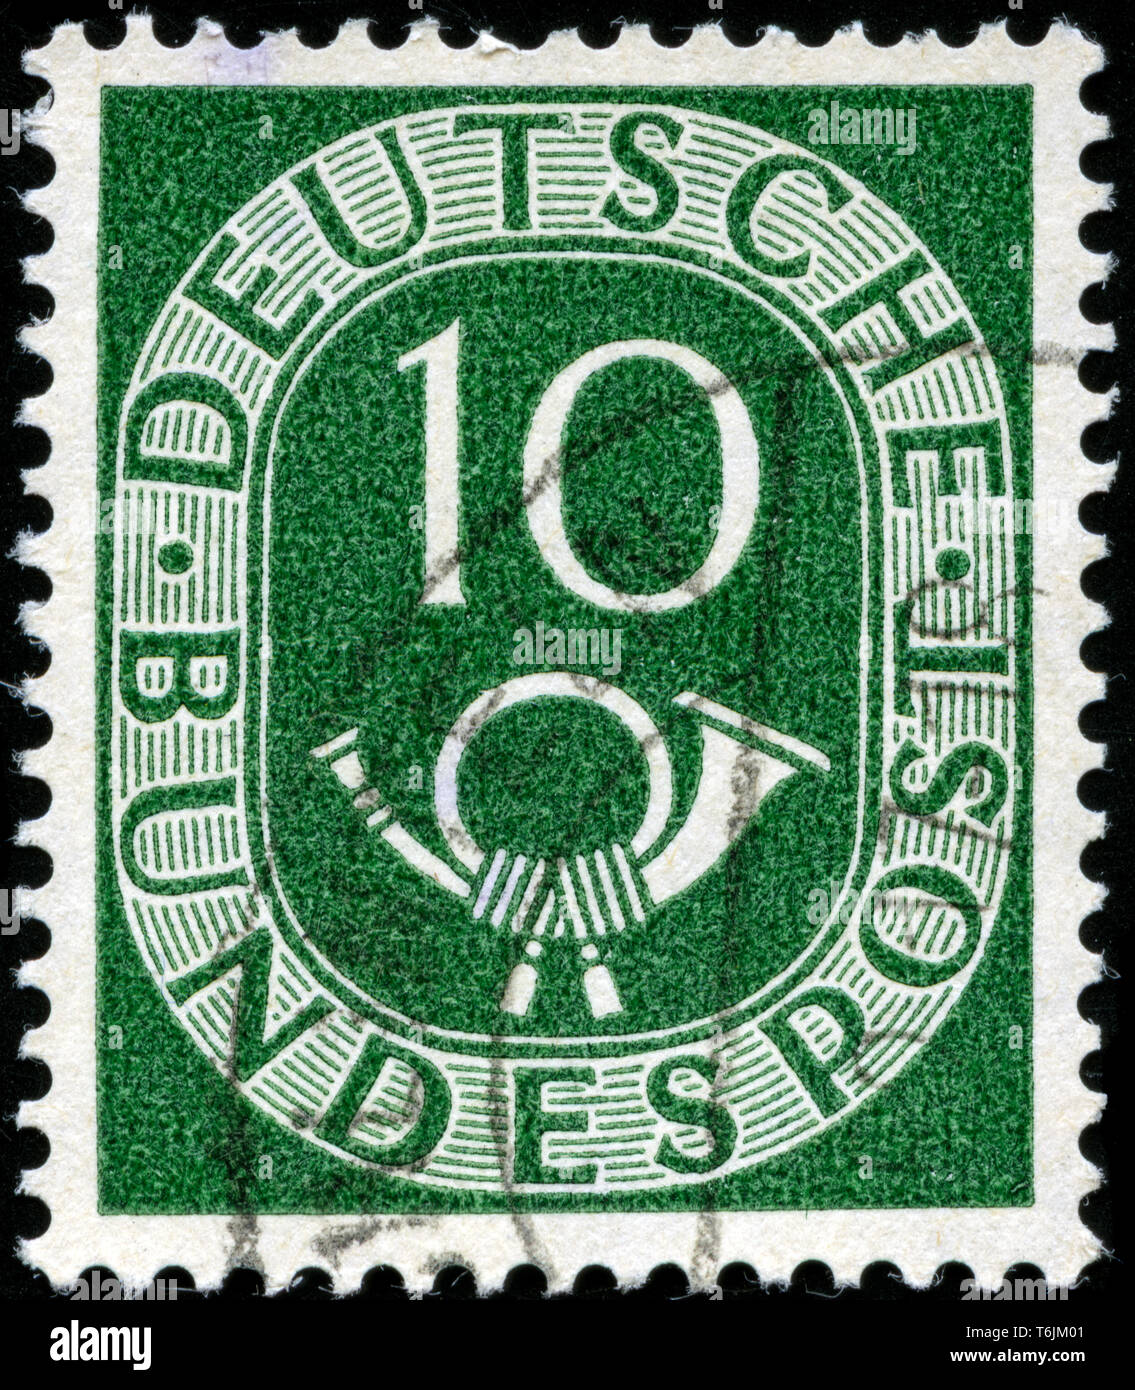 Postage stamp from the Federal Republic of Germany in the Posthorn series issued in 1951 Stock Photo